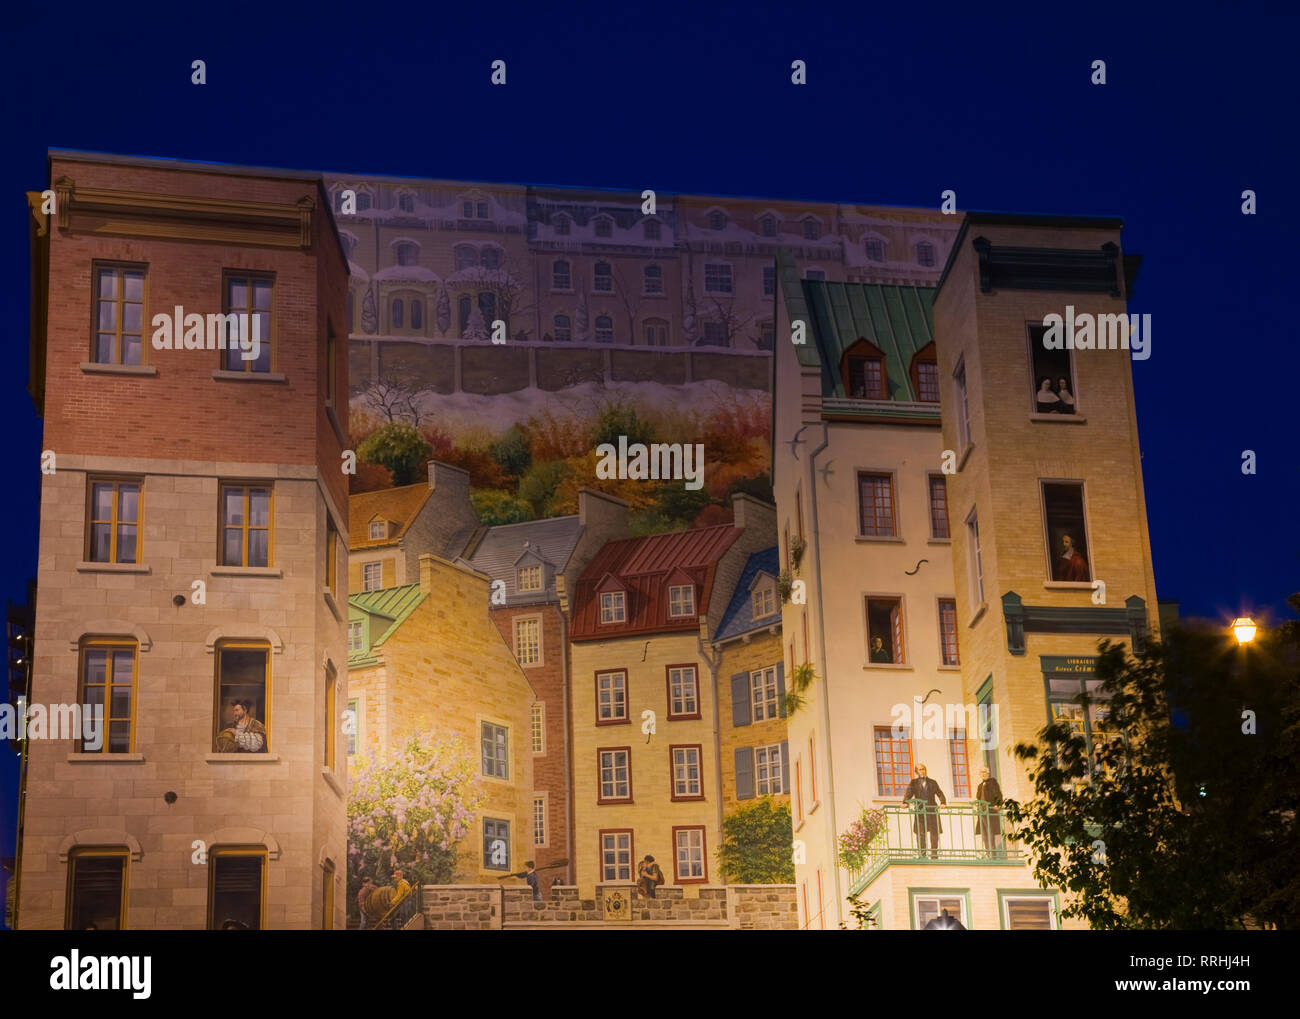 La Fresque des Quebecois wall mural illuminated at night, Notre-Dame street, Old Quebec City, Quebec, Canada Stock Photo